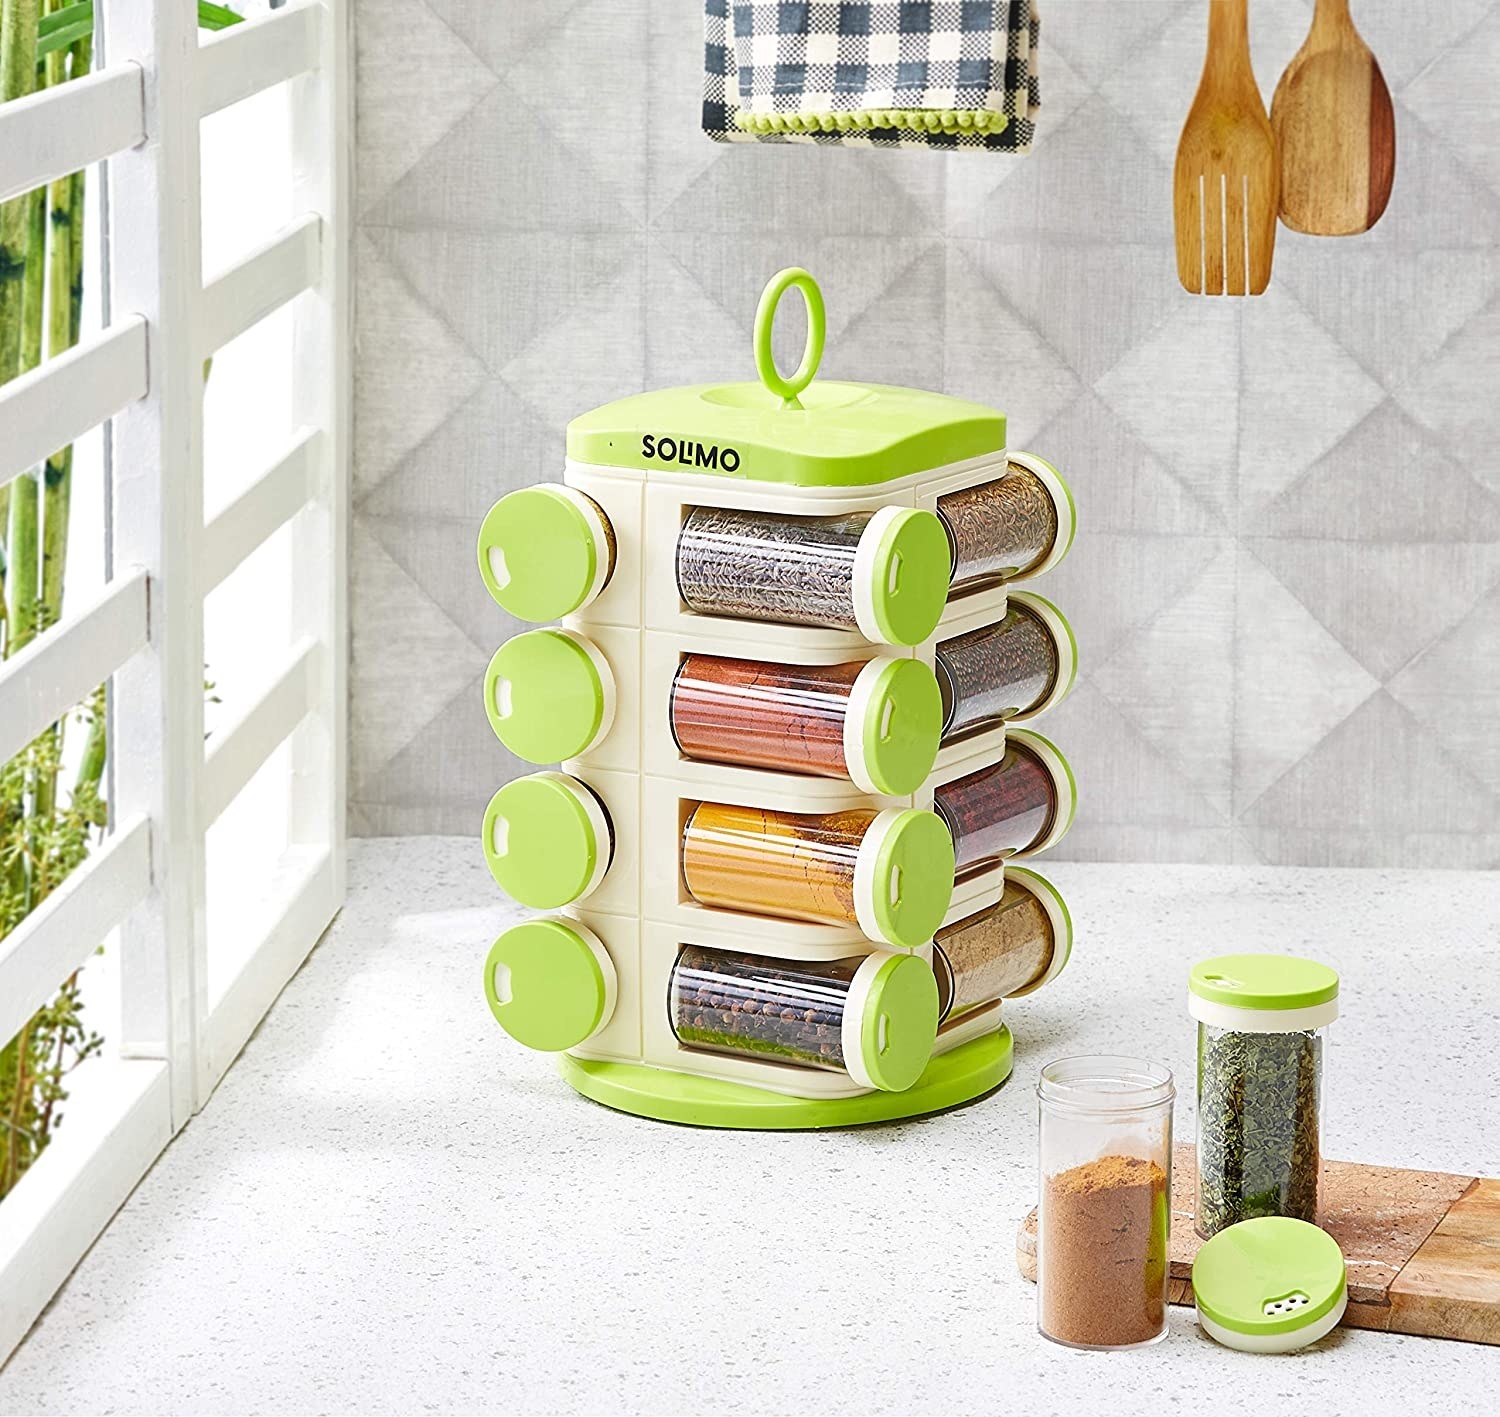 The spice rack kept on a kitchen counter. The jars have green lids and contain different spices.